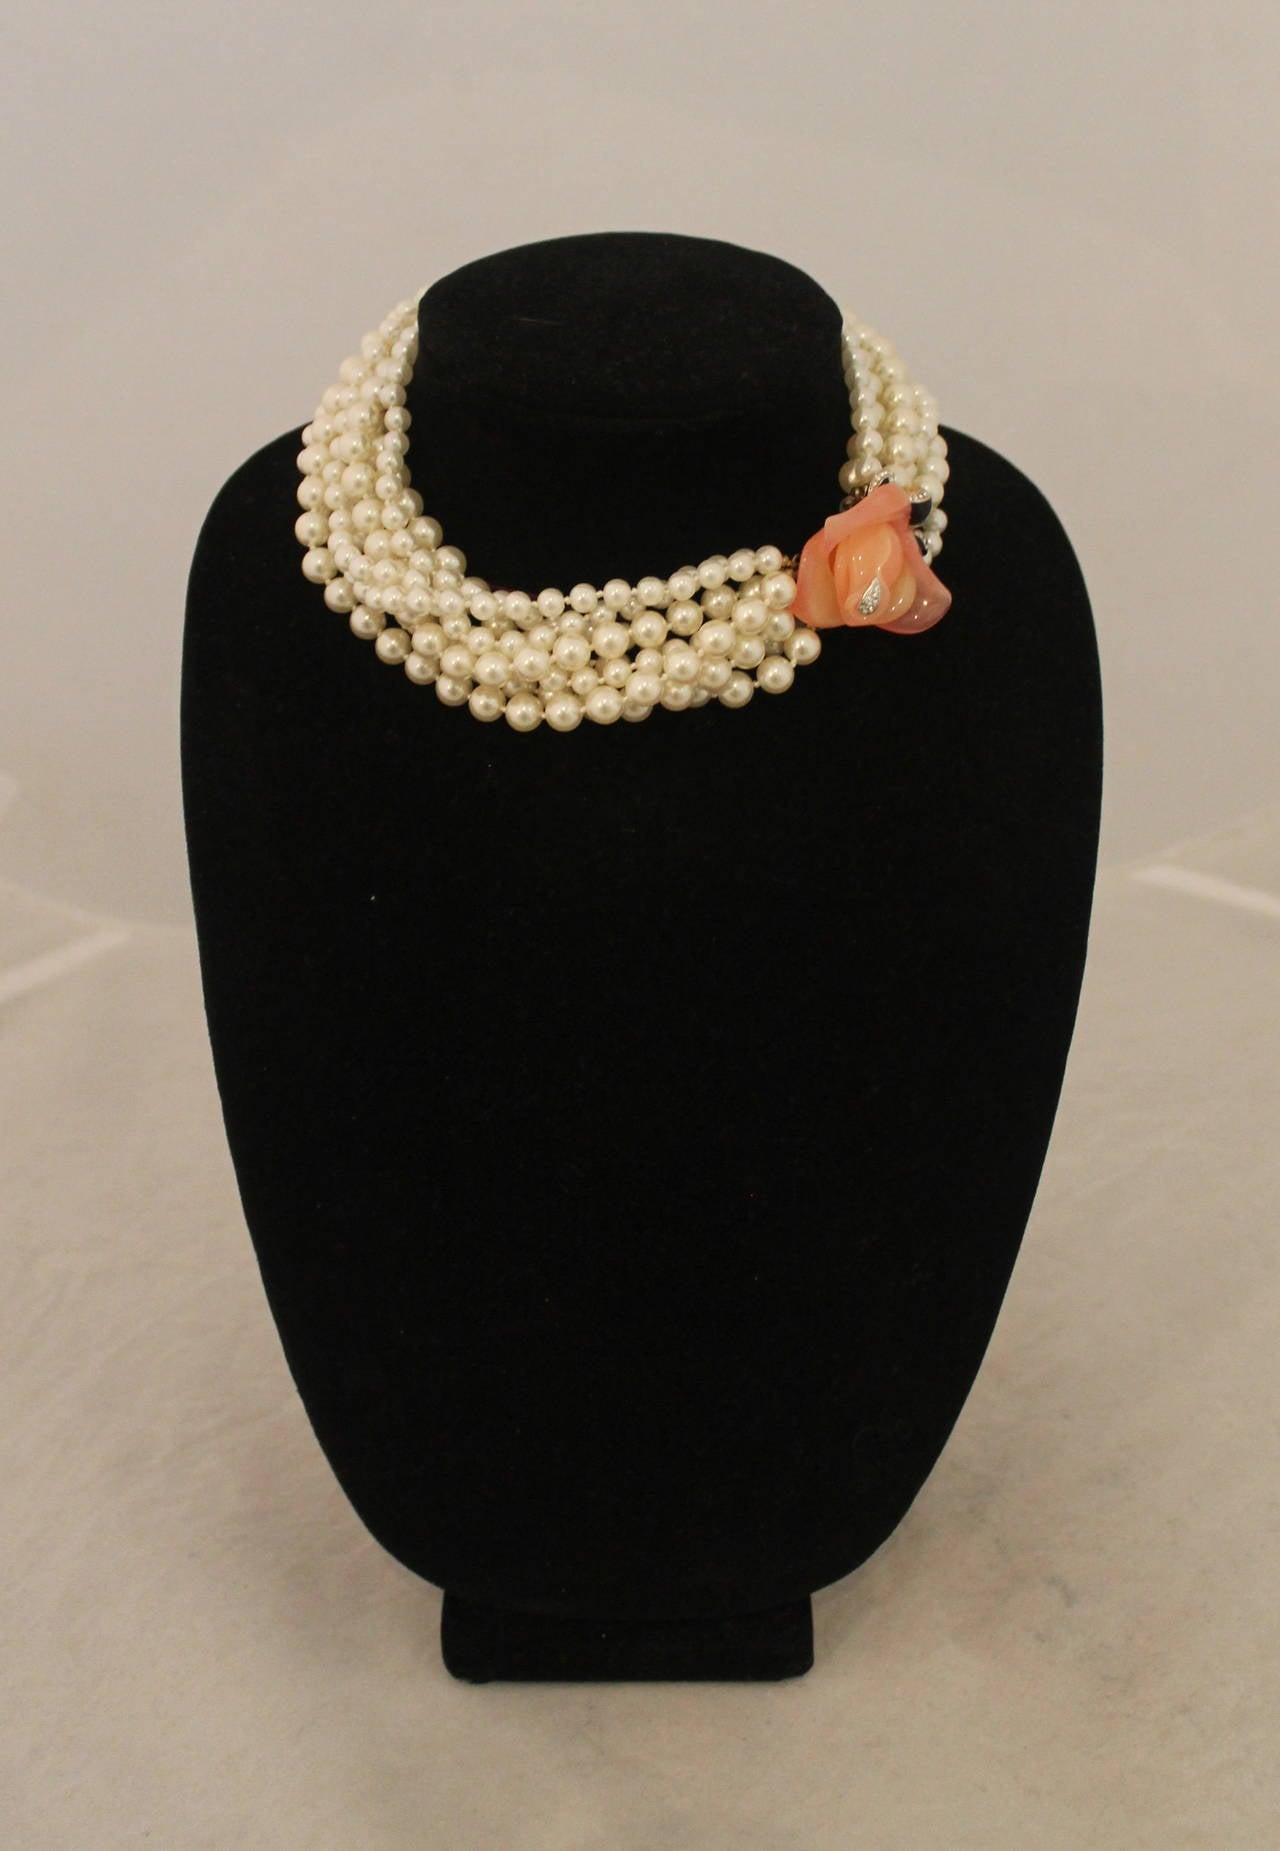 Kenneth Jay Lane 1990's 8-Strand Pearl & Rose Motif Necklace. This necklace is in excellent vintage condition with very minor wear. The strands of pearls are differing sizes and hook together by a peach colored rose clasp. It has a Lucite look and